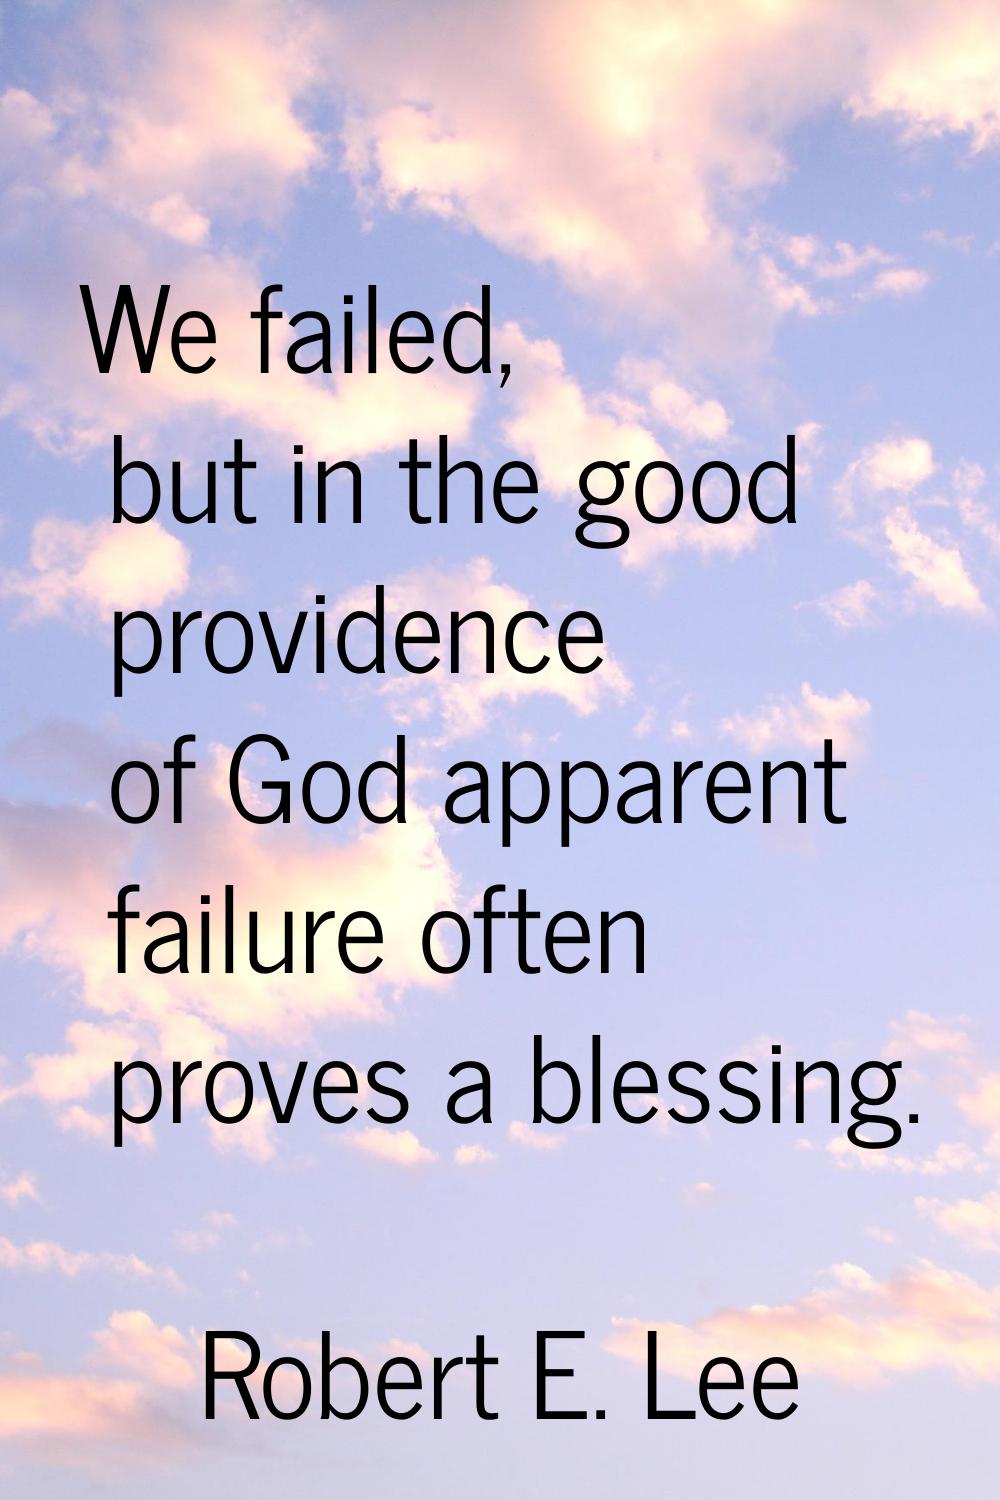 We failed, but in the good providence of God apparent failure often proves a blessing.